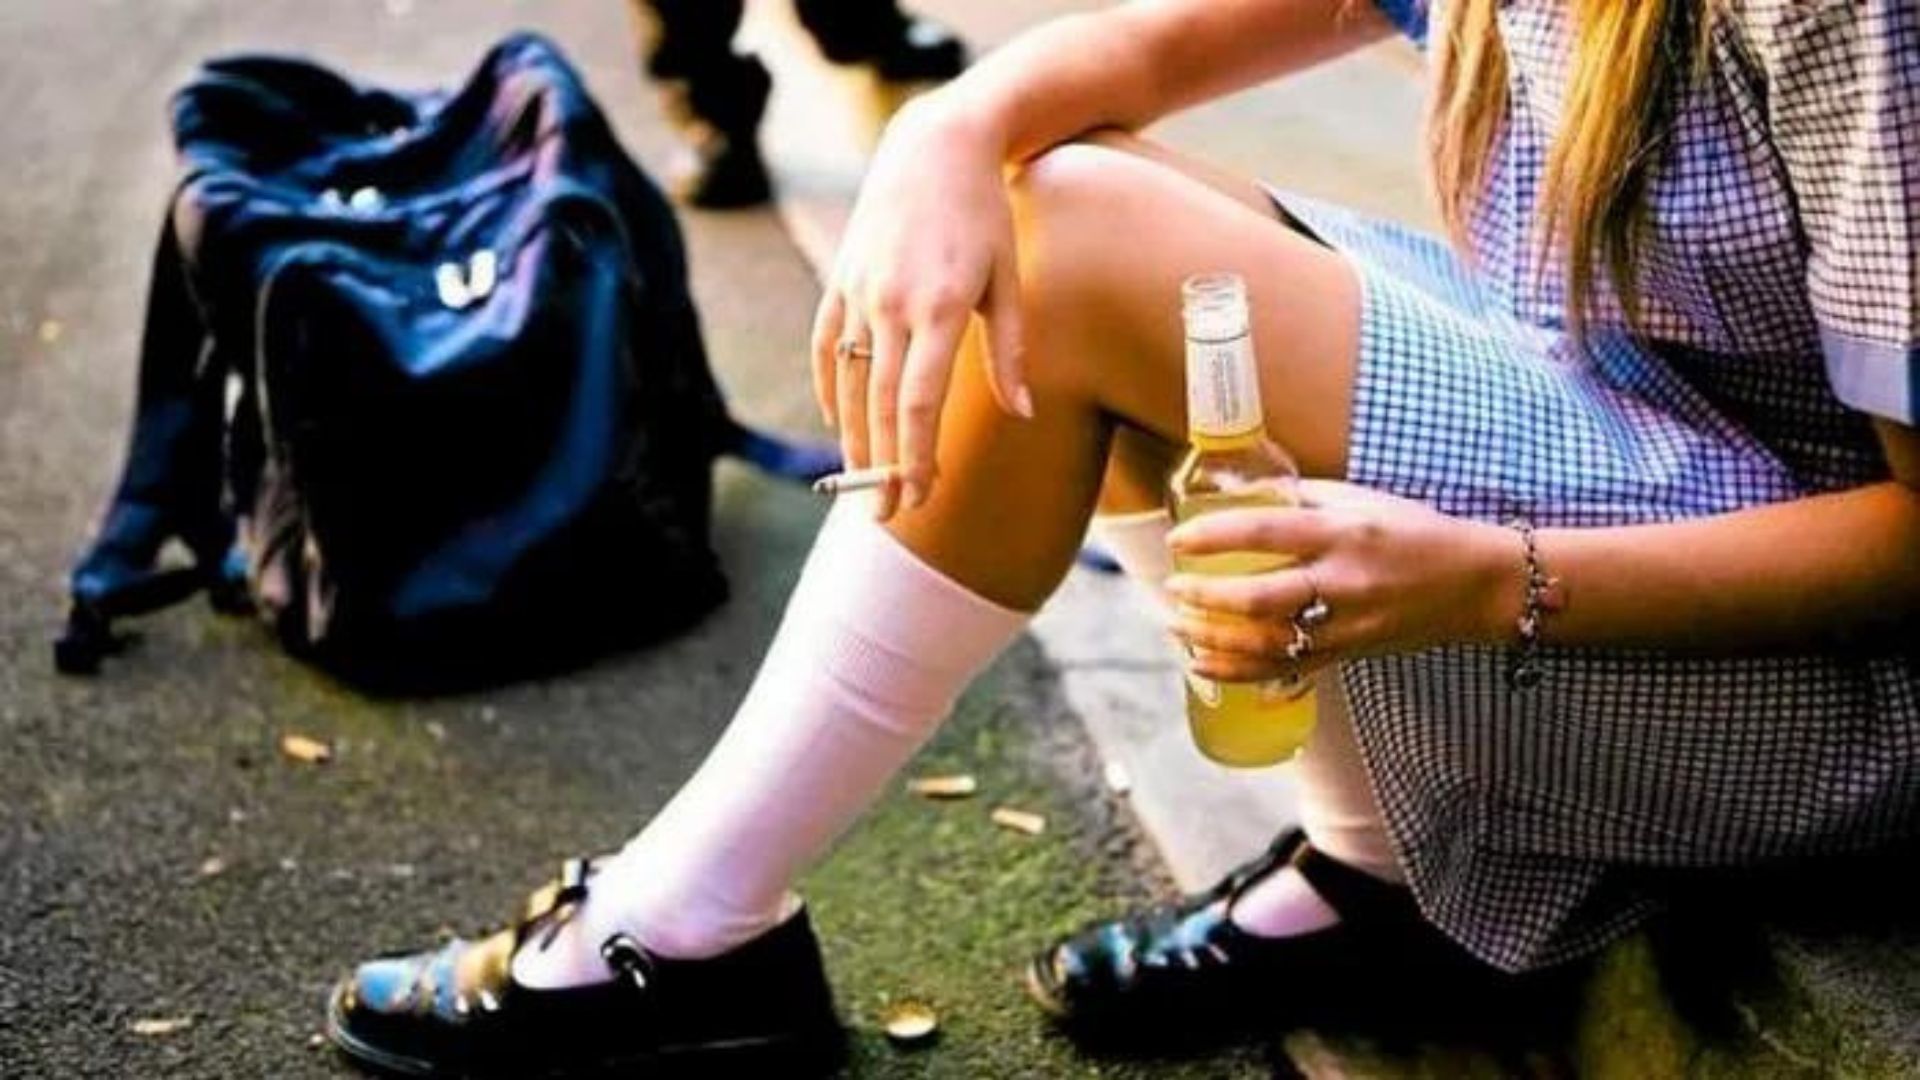 a school teenage girl holding alcohol and a cigarette showing challenges facing youths 